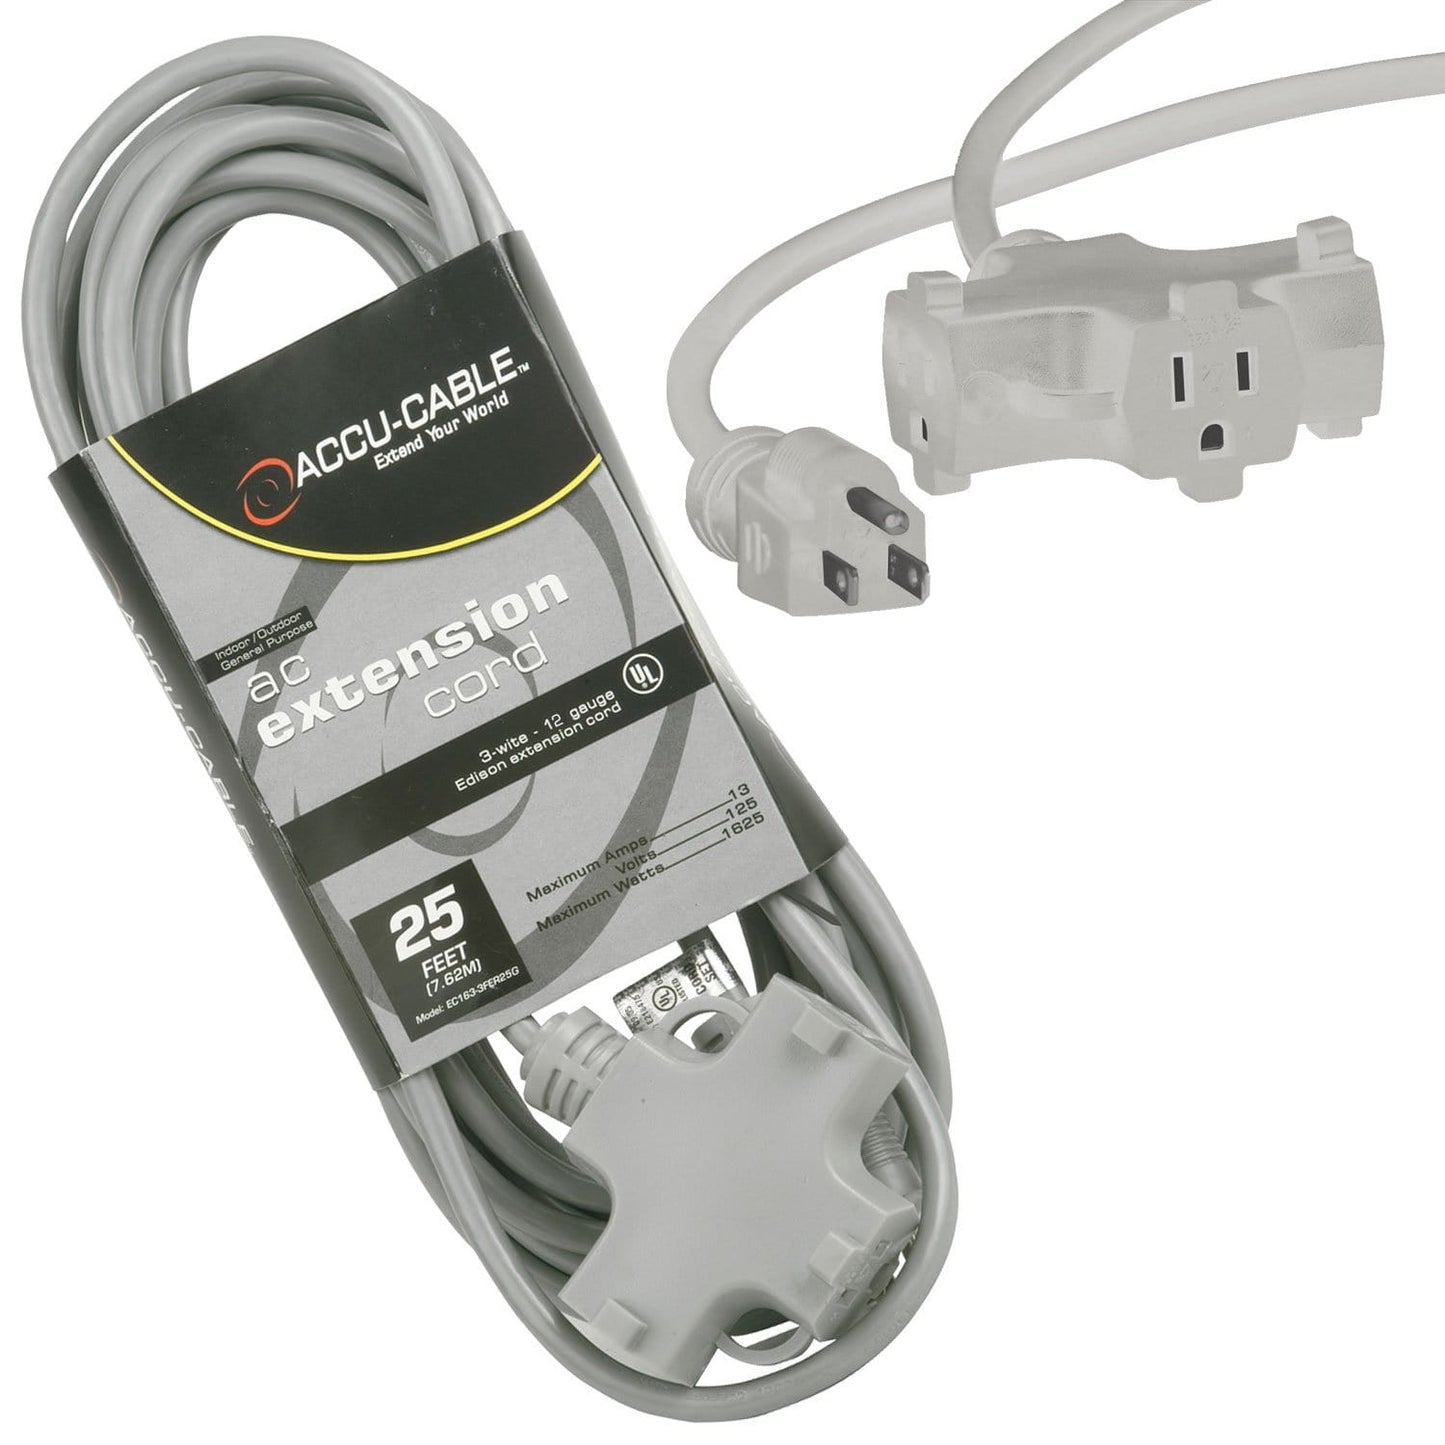 Accu-Cable 25 FT Triple Tap Gray Extension Cord 12 Guage - ProSound and Stage Lighting